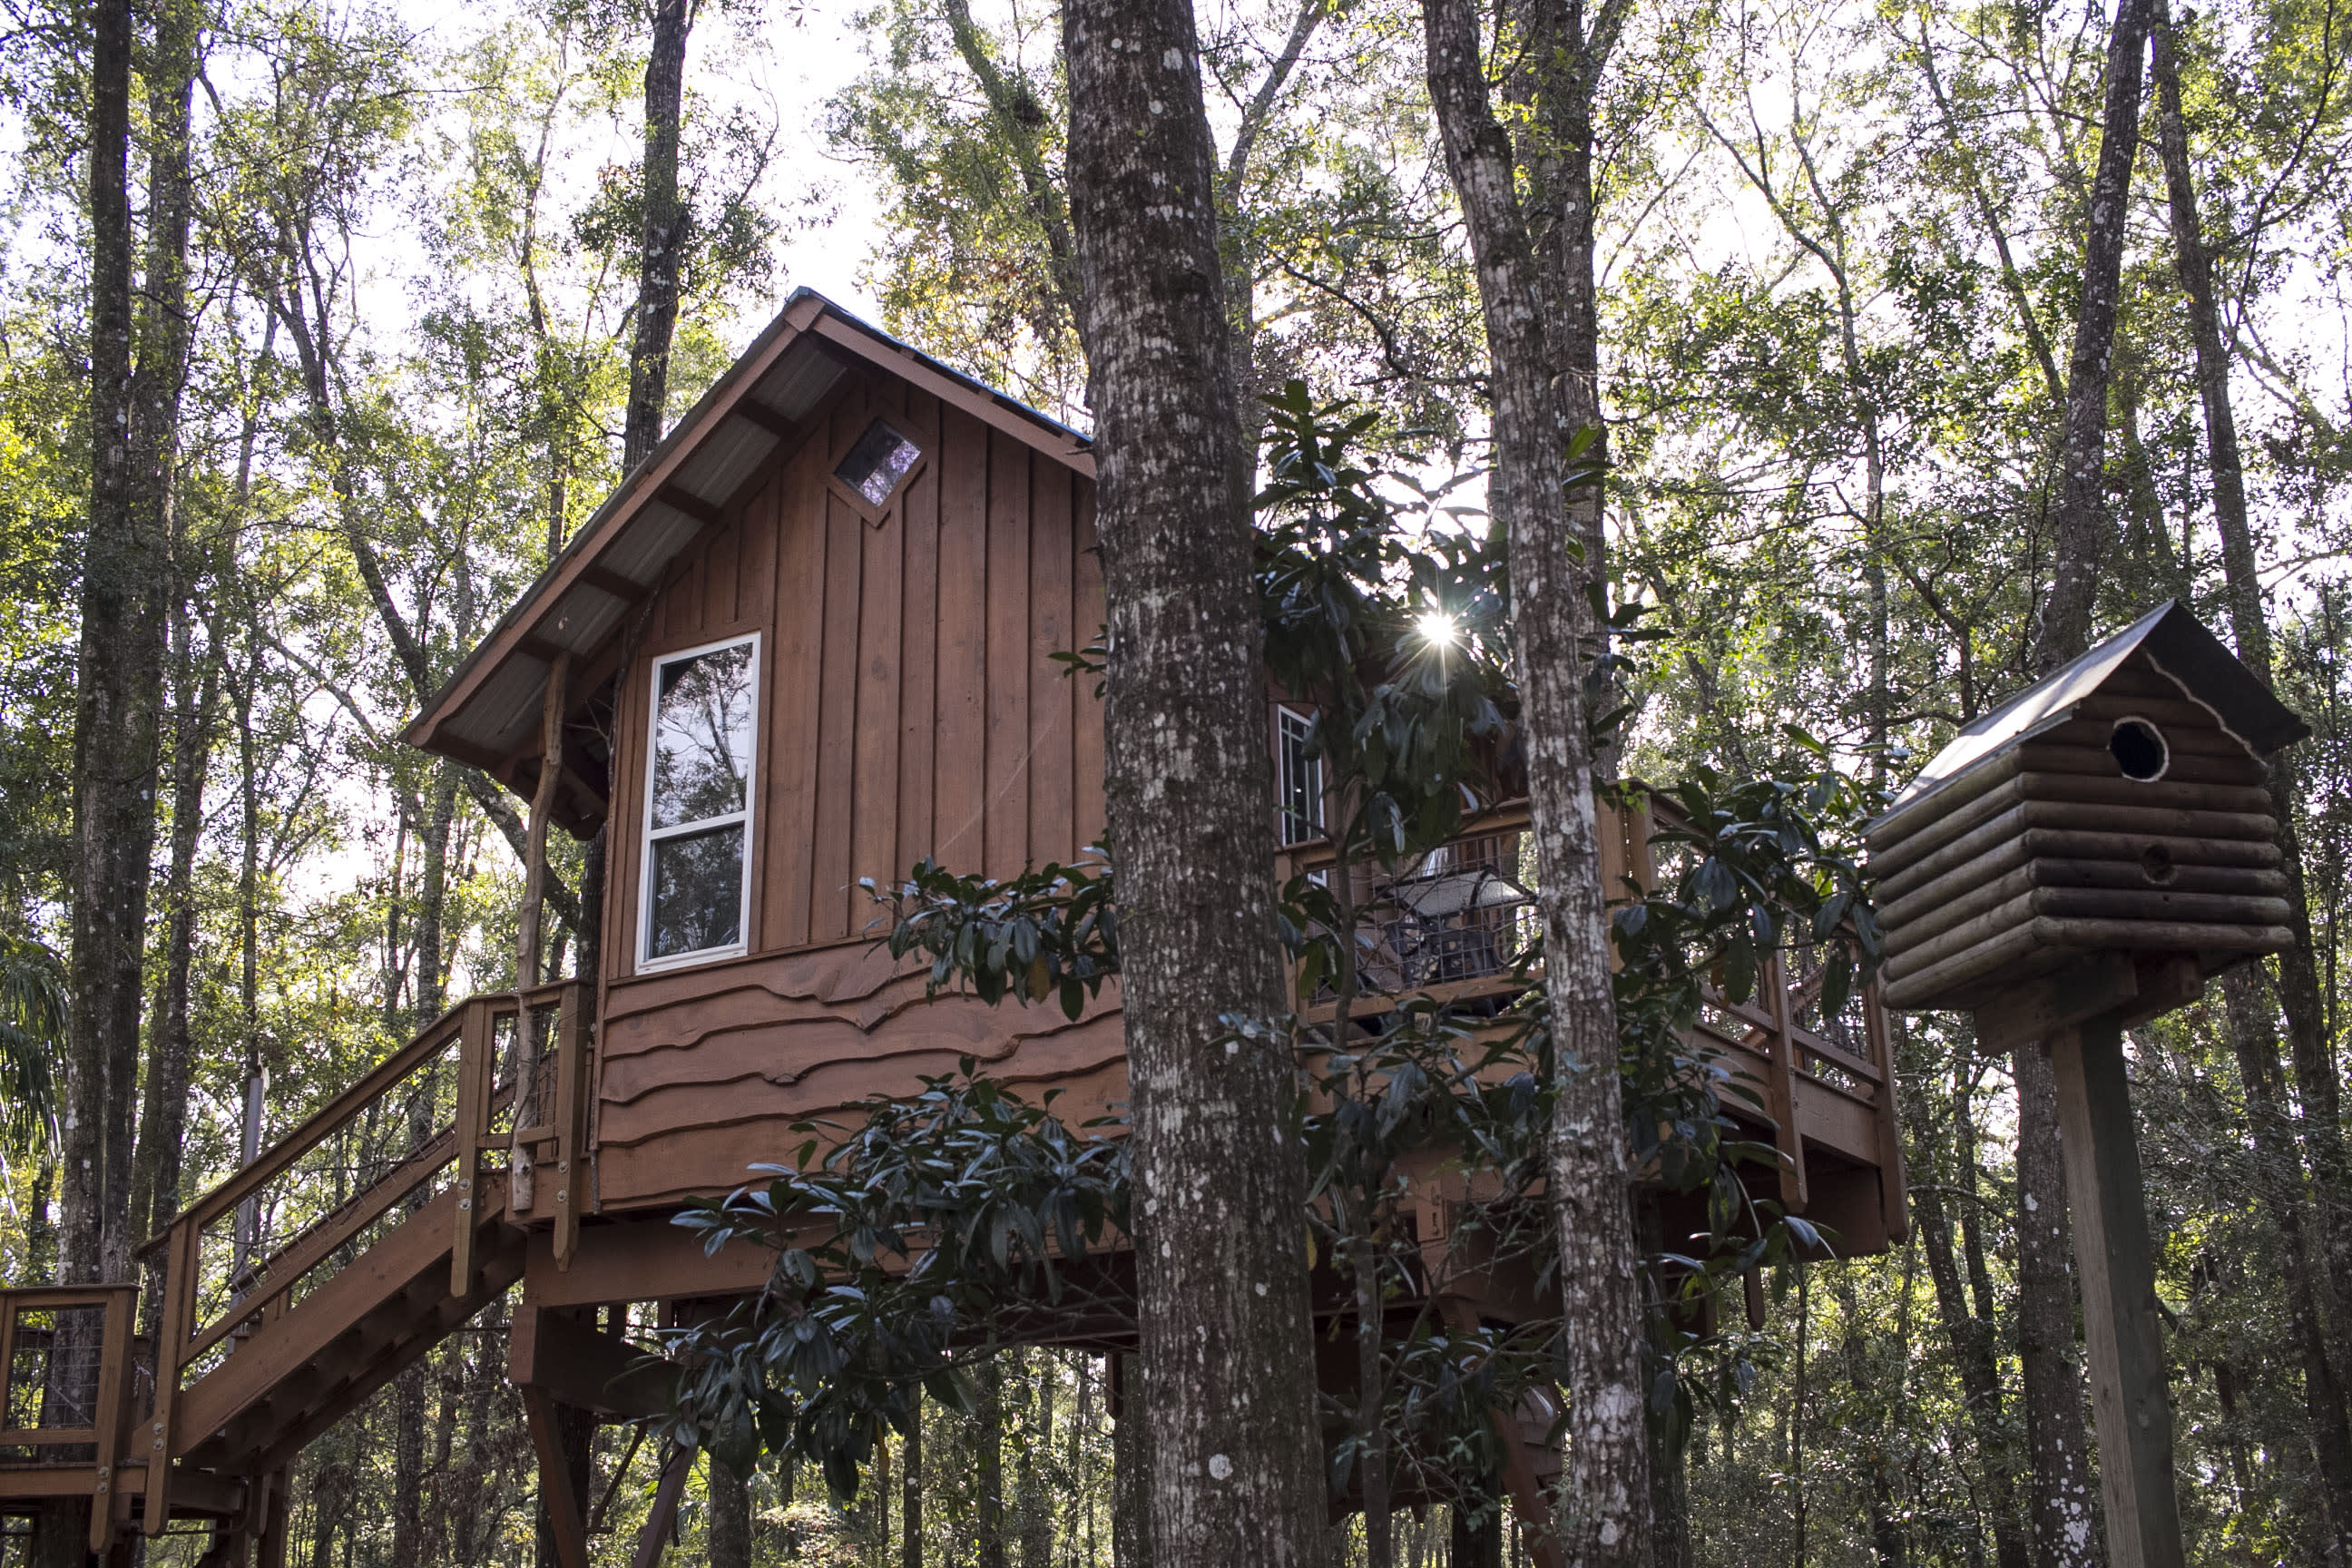 Awaken your inner child with this high-up-in-trees home!